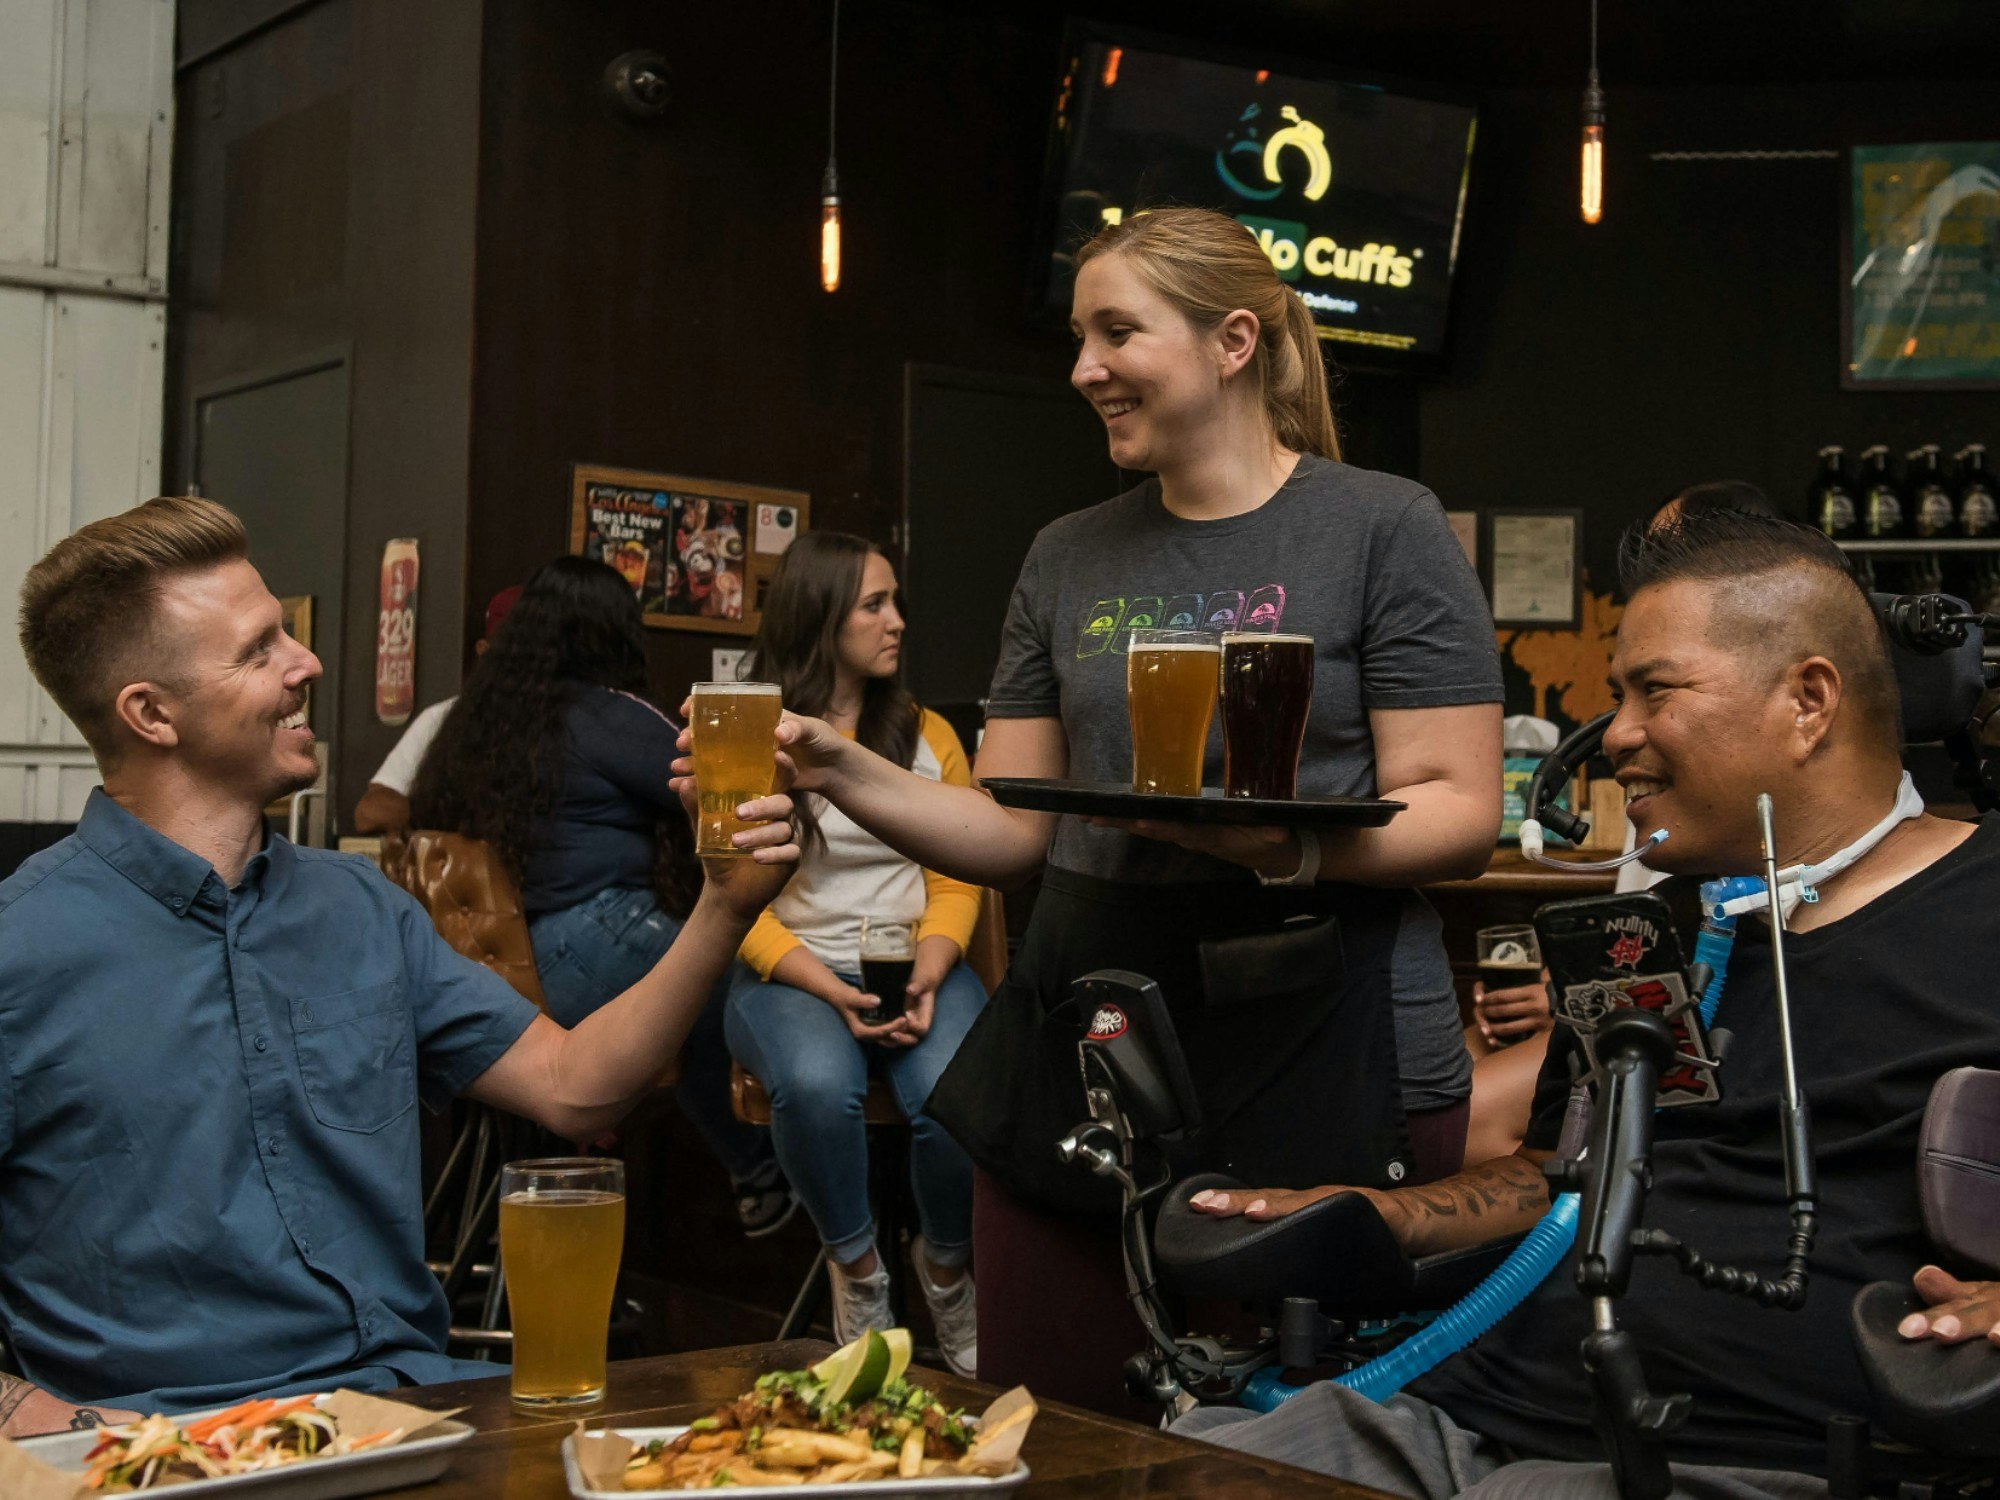 Two people being served beer at a pub table. One of them is using a wheelchair and other assistive technology support.